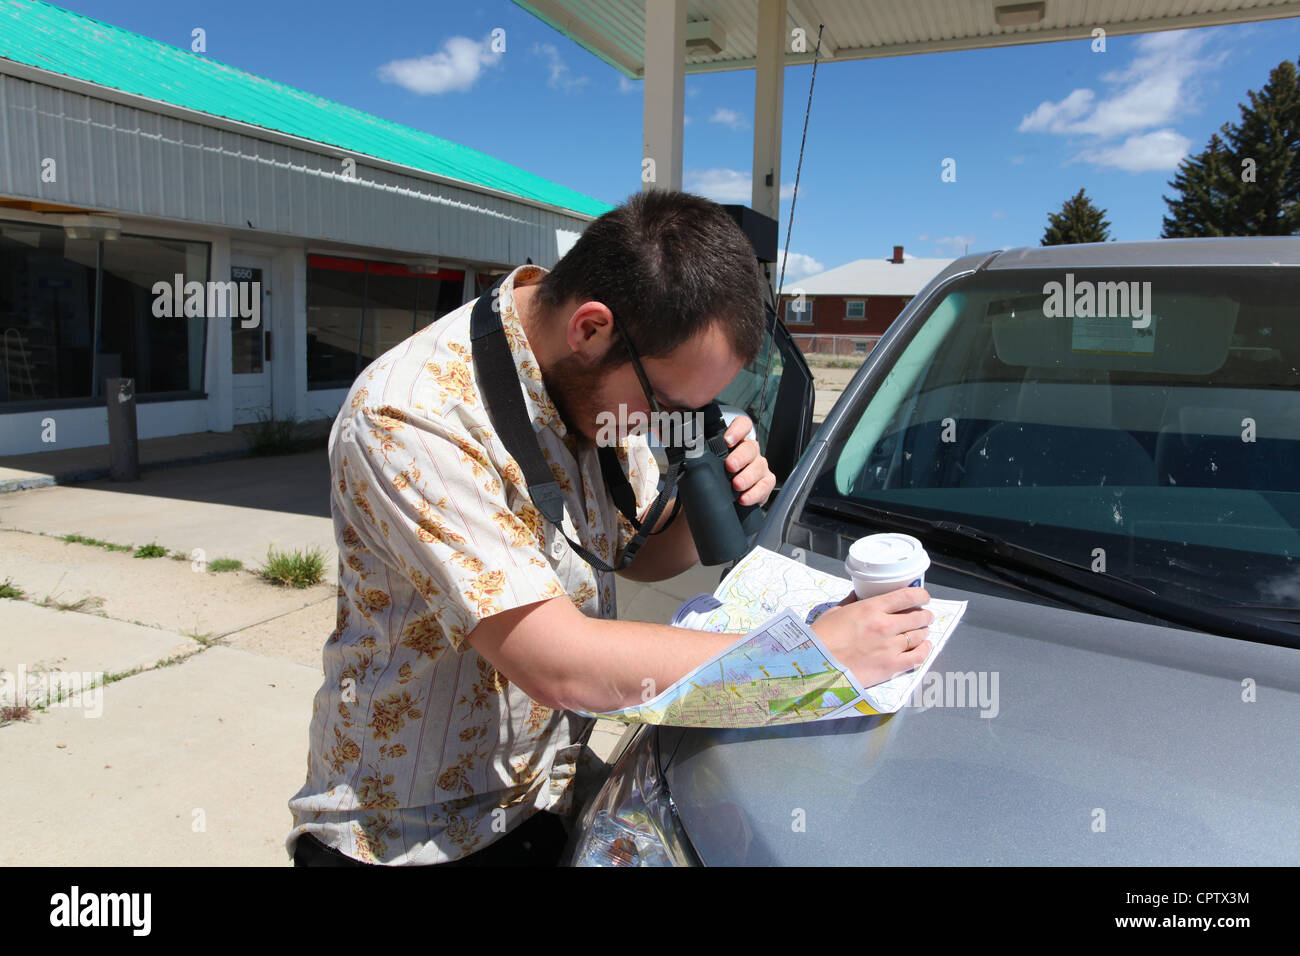 Man studies roadmap with binoculars with abandoned service station in background Stock Photo